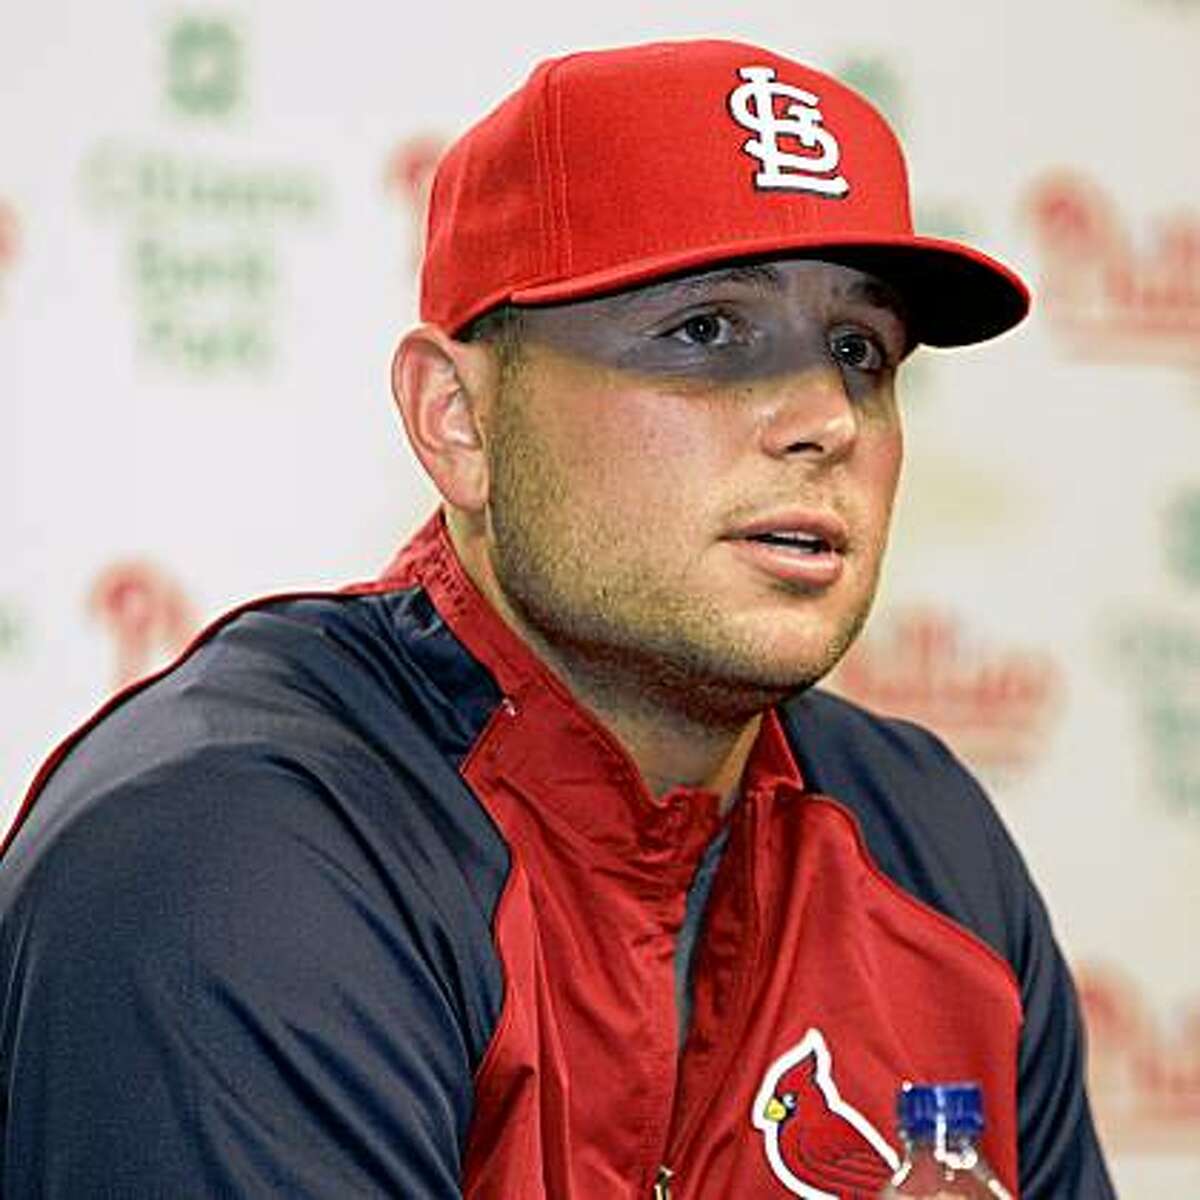 Matt Holliday appears at a news conference Friday, July 24, 2009, in Philadelphia, after it was announced that he had been traded from the Oakland Athletics to the St. Louis Cardinals for a package of prospects. (AP Photo/Tom Mihalek)